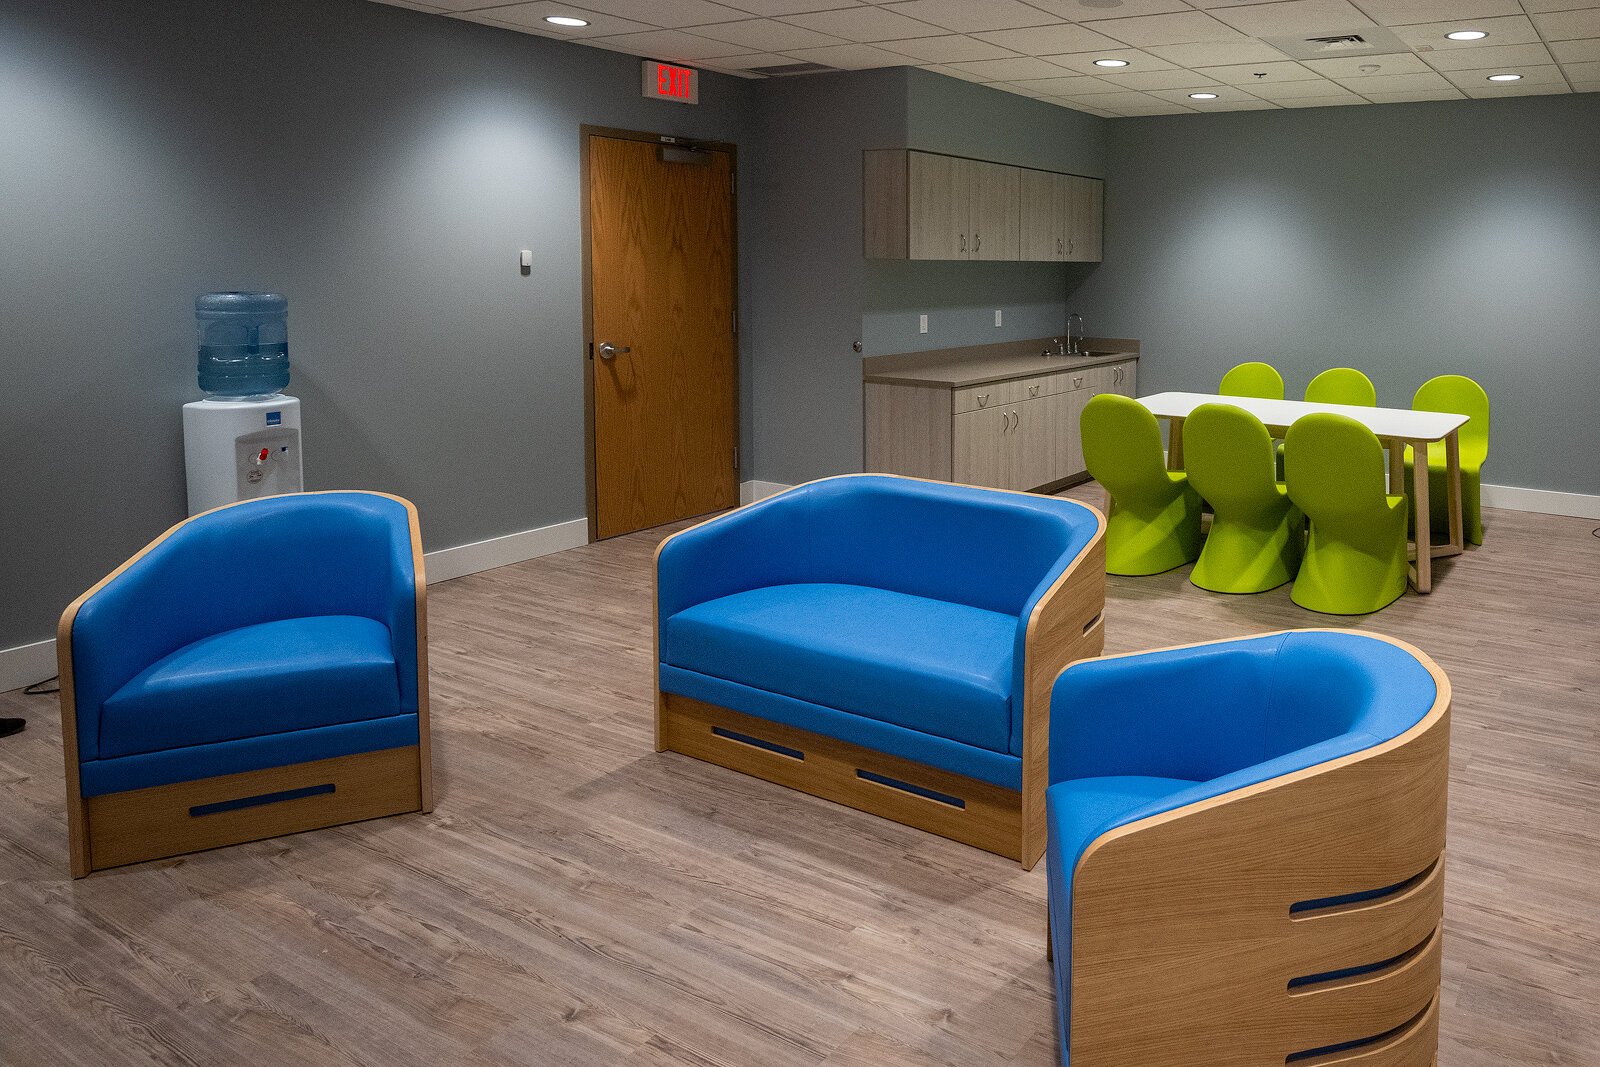 The 23-hour crisis stabilization unit at LifeWays Community Mental Health's new mental health crisis service center, funded by Jackson County's mental health millage.